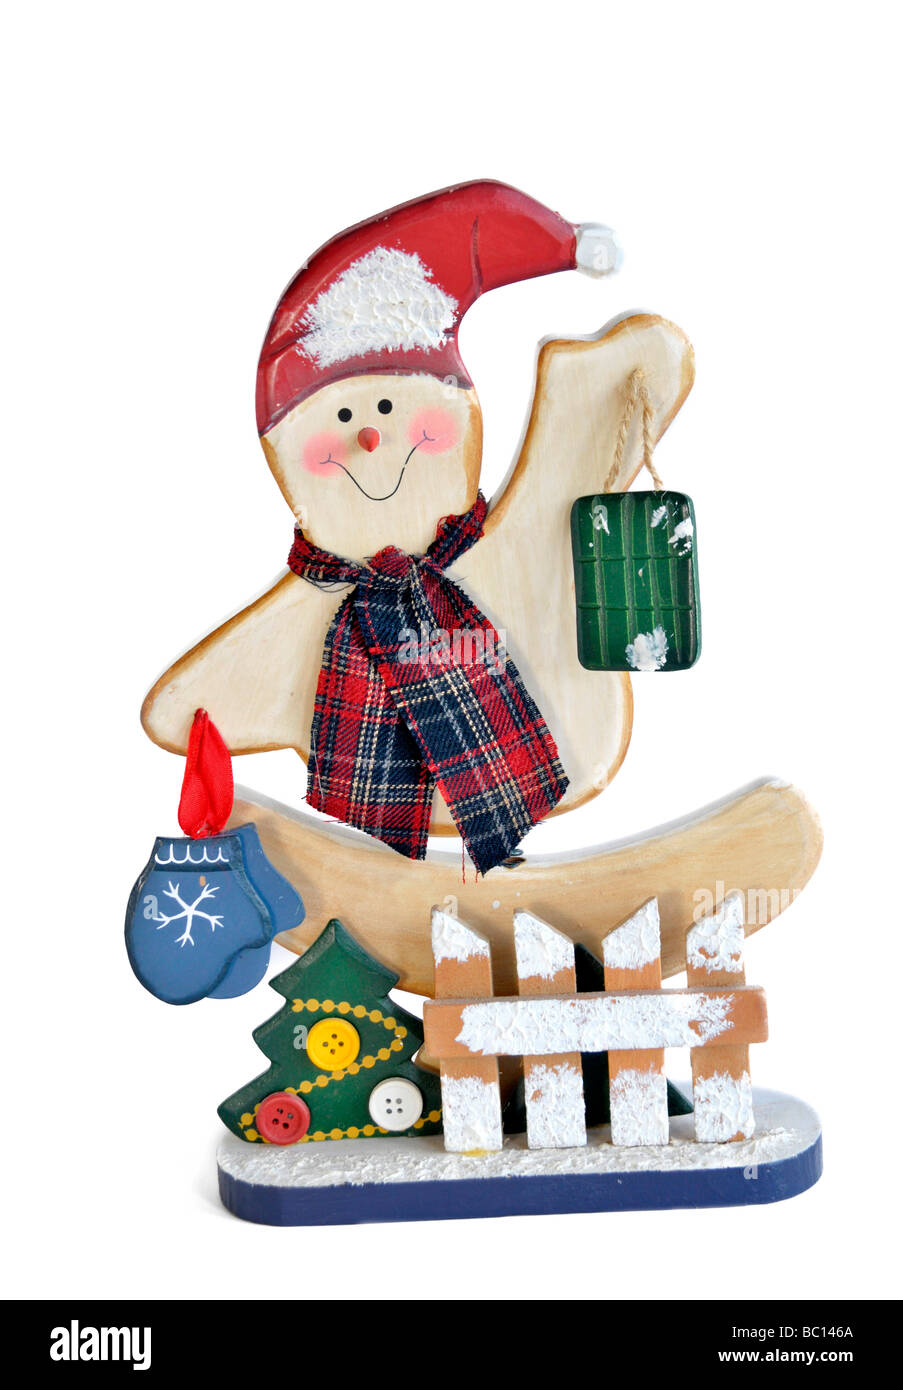 cutout of a smiling snowman decoration. Stock Photo